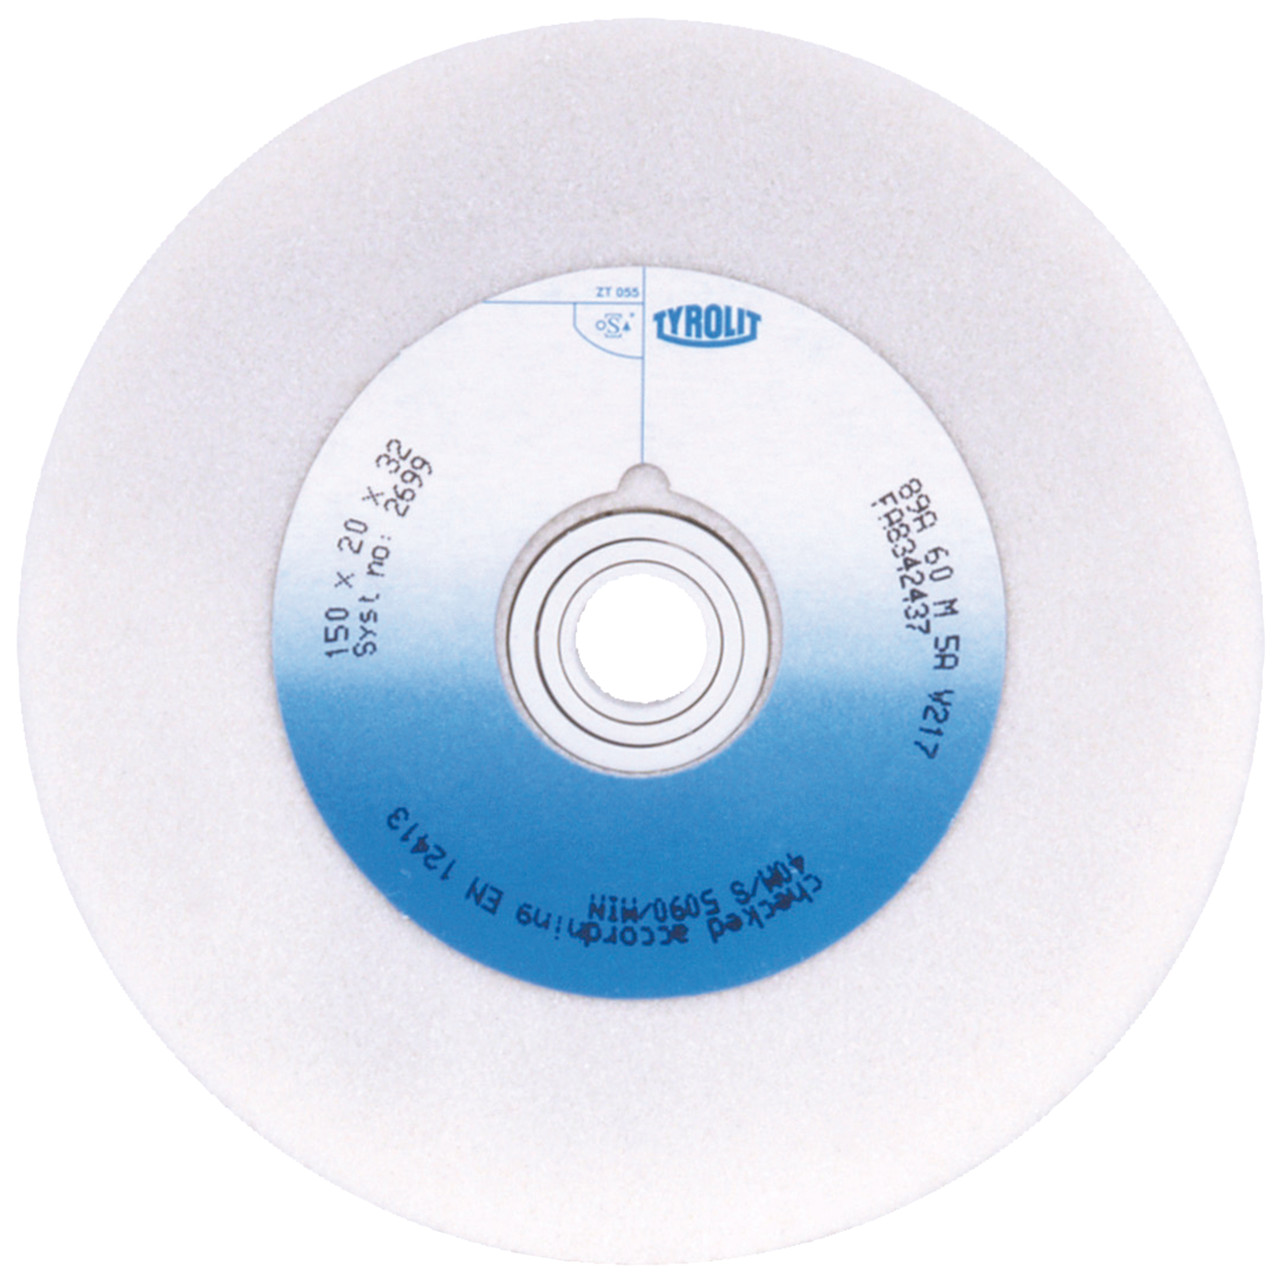 Tyrolit Conventional ceramic grinding discs DxDxH 300x40x51 For high-alloy steels and HSS, shape: 1, Art. 867598